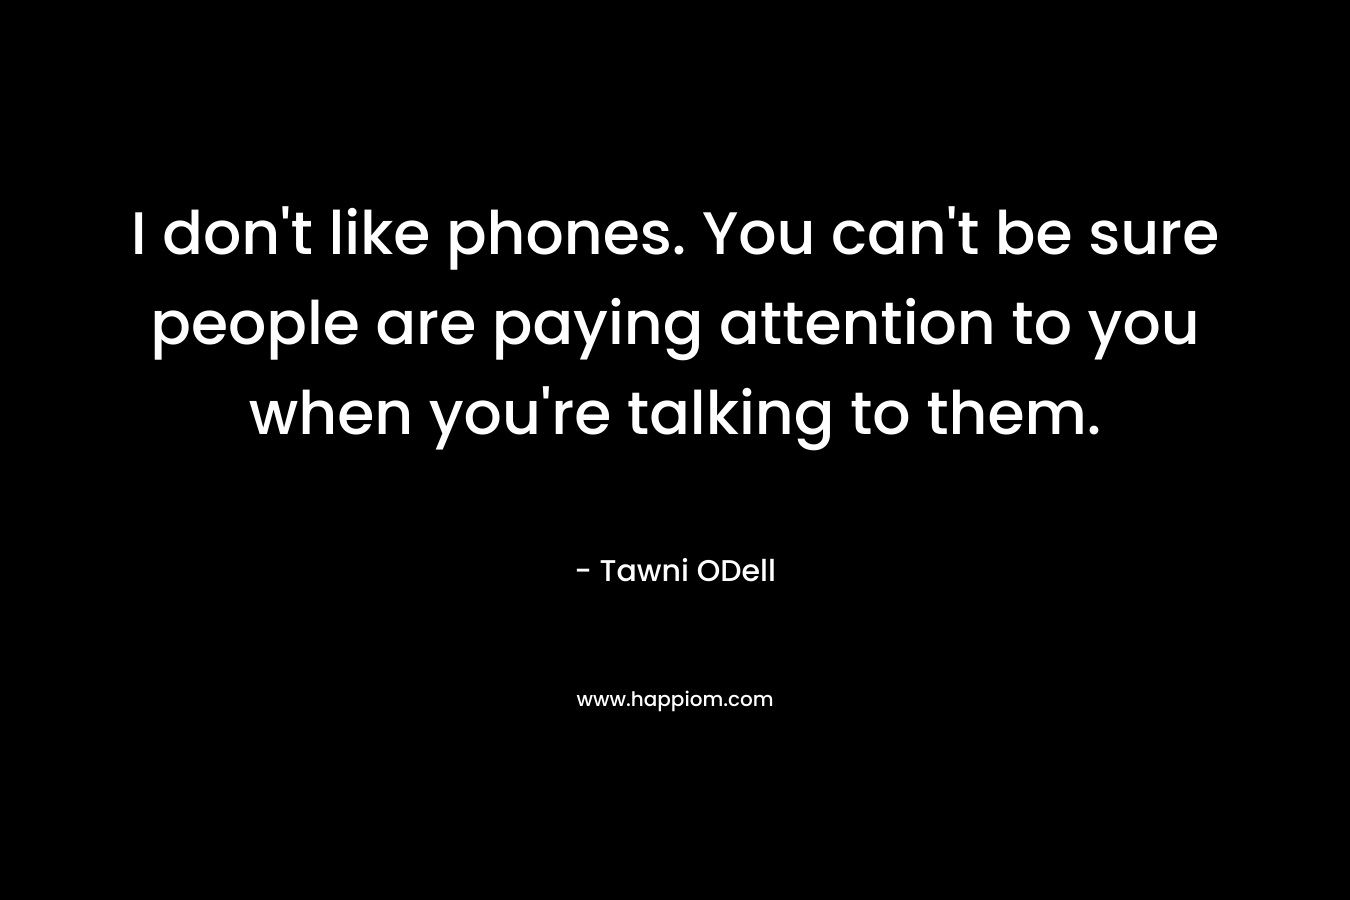 I don’t like phones. You can’t be sure people are paying attention to you when you’re talking to them. – Tawni ODell